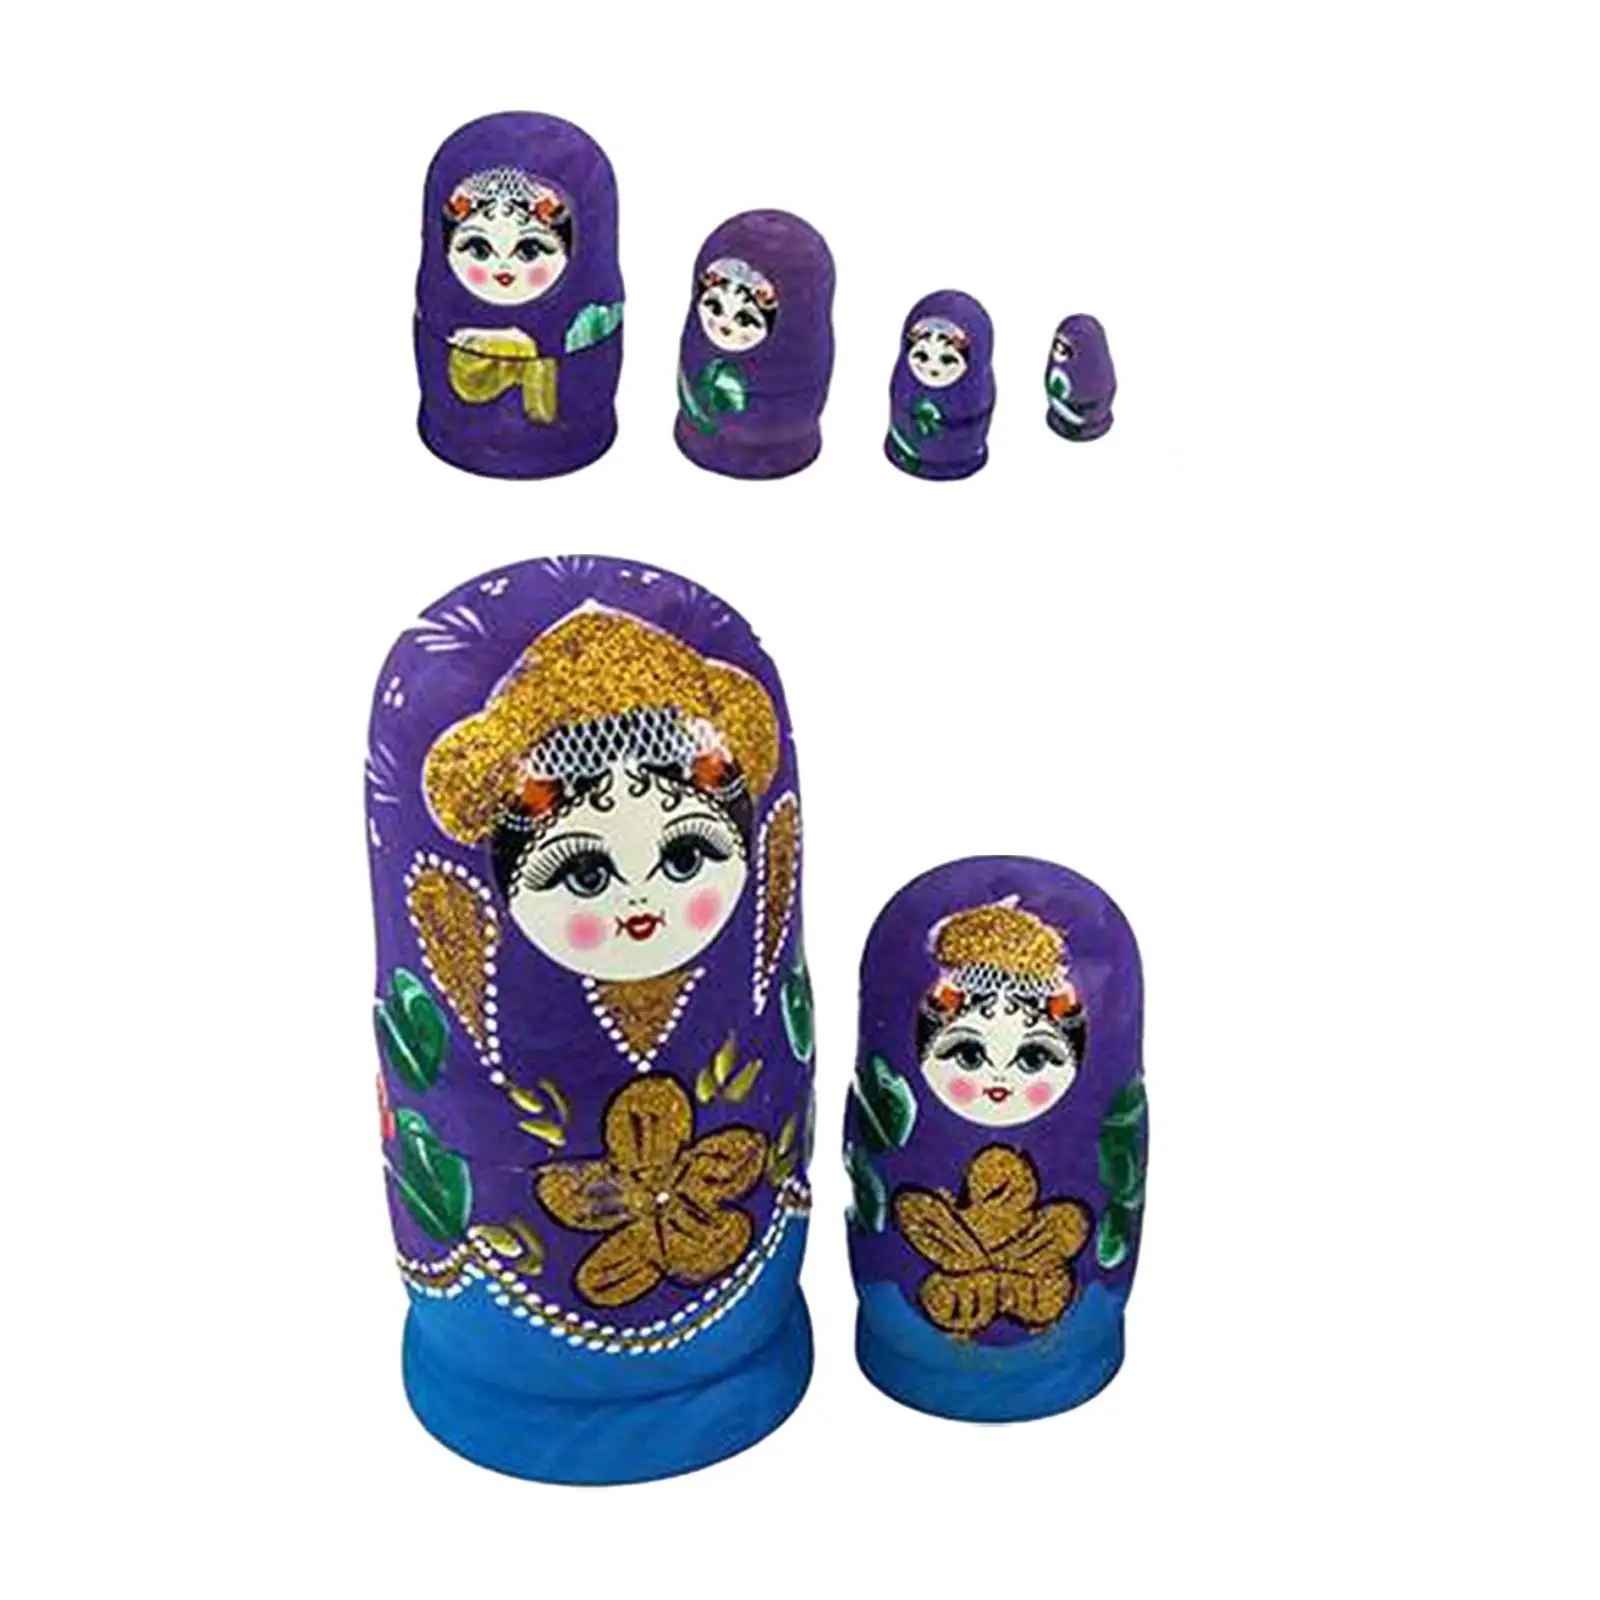 7 Pieces Nesting Doll Wood Stacking Nested Set for Easter Home Decoration